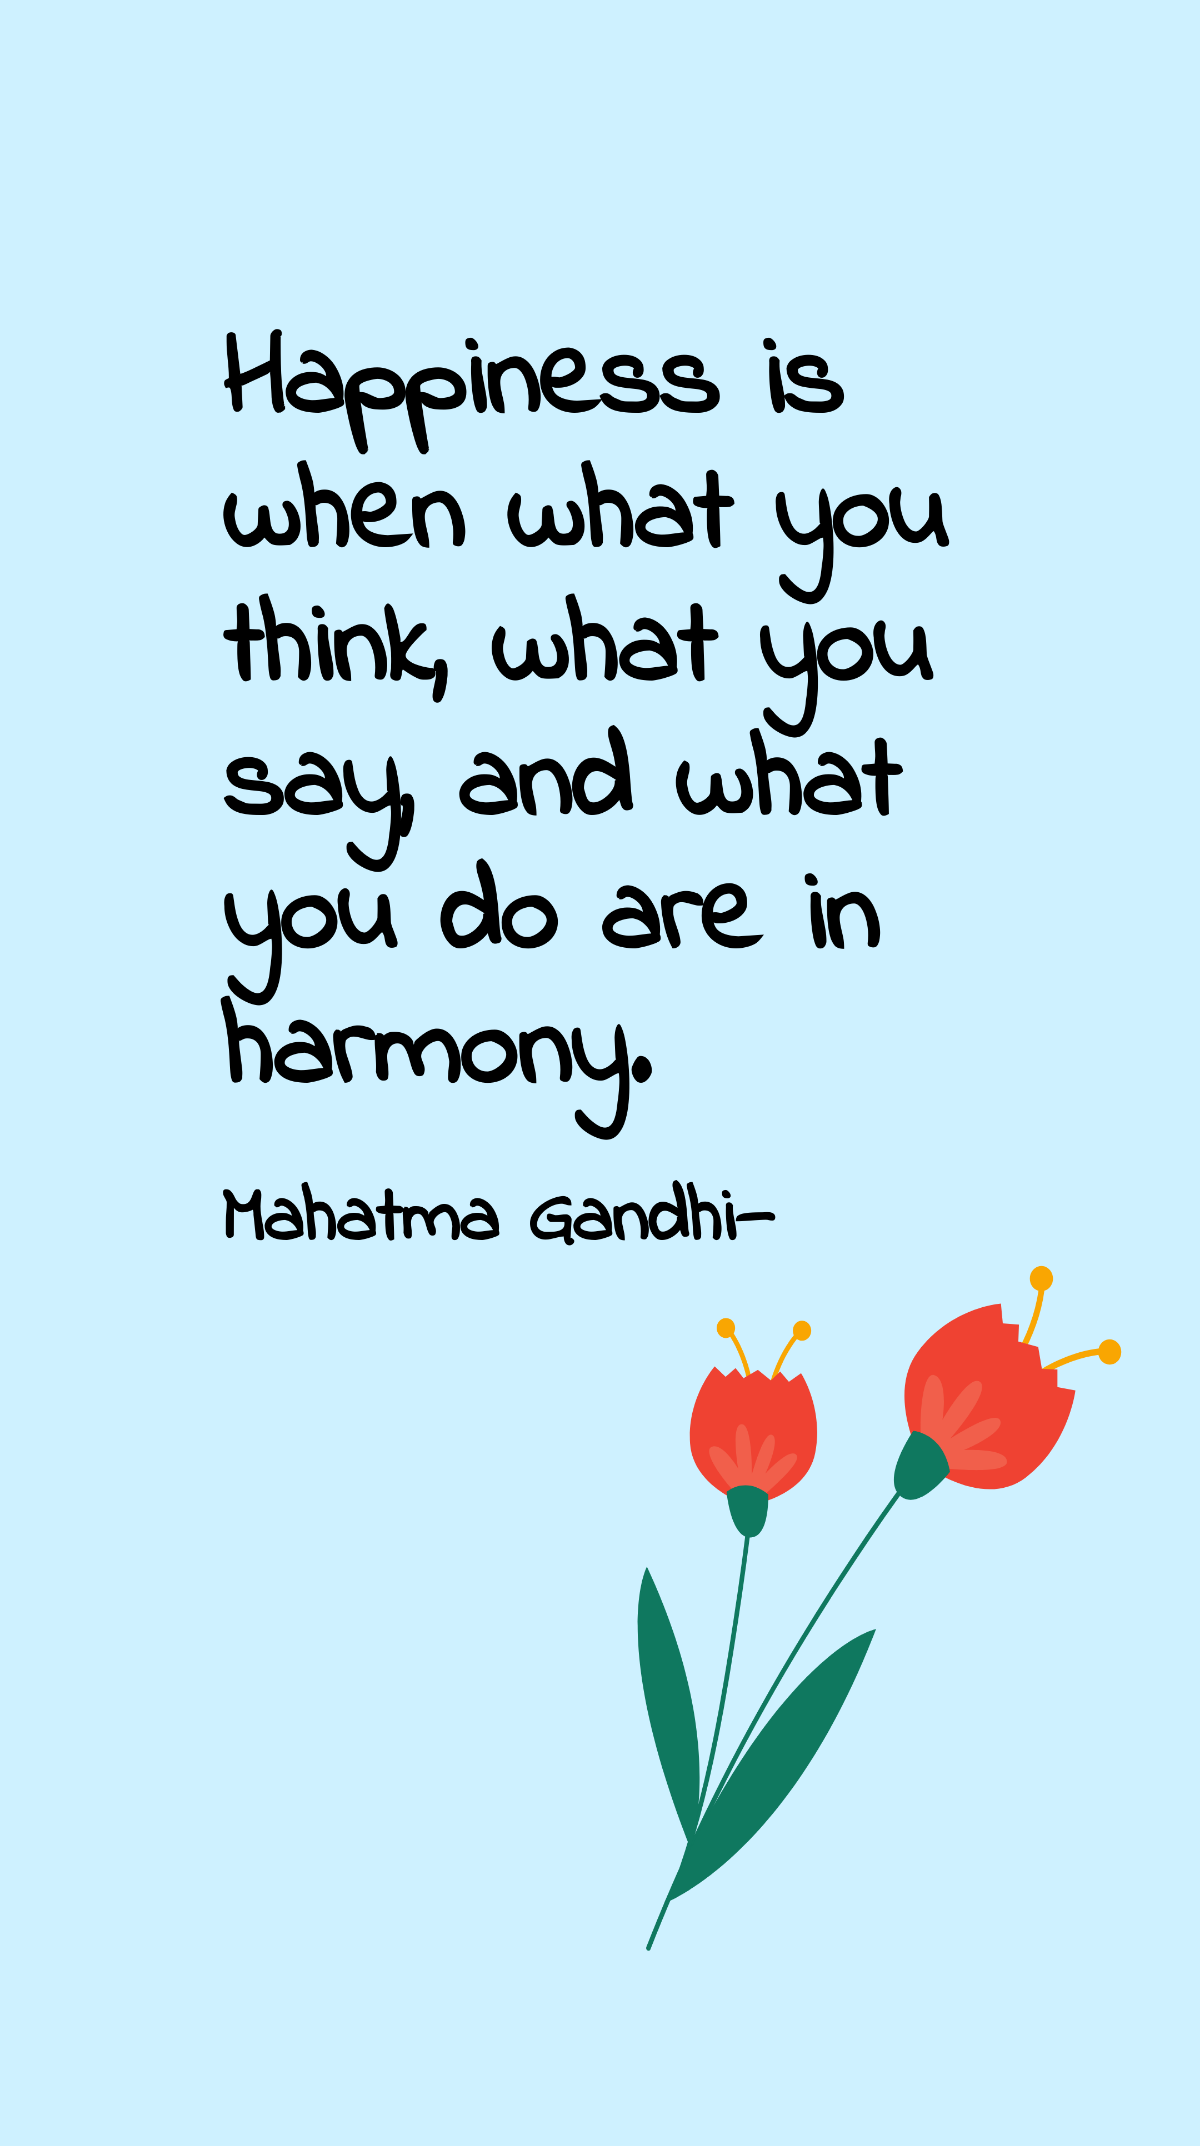 Mahatma Gandhi - Happiness is when what you think, what you say, and what you do are in harmony. Template